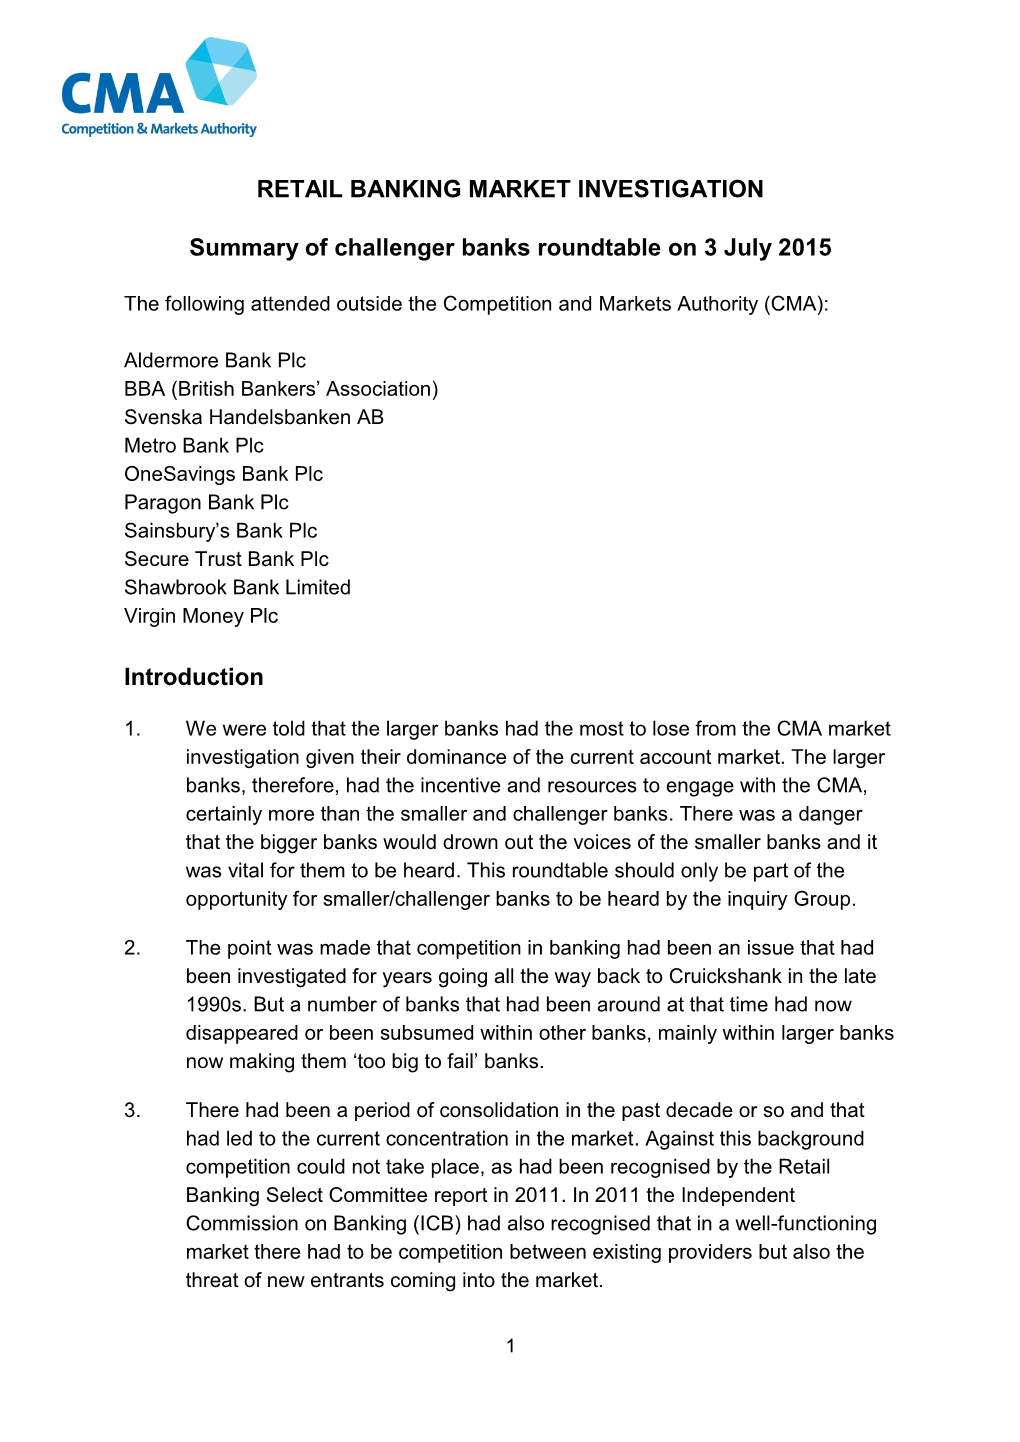 Challenger Banks Roundtable Summary